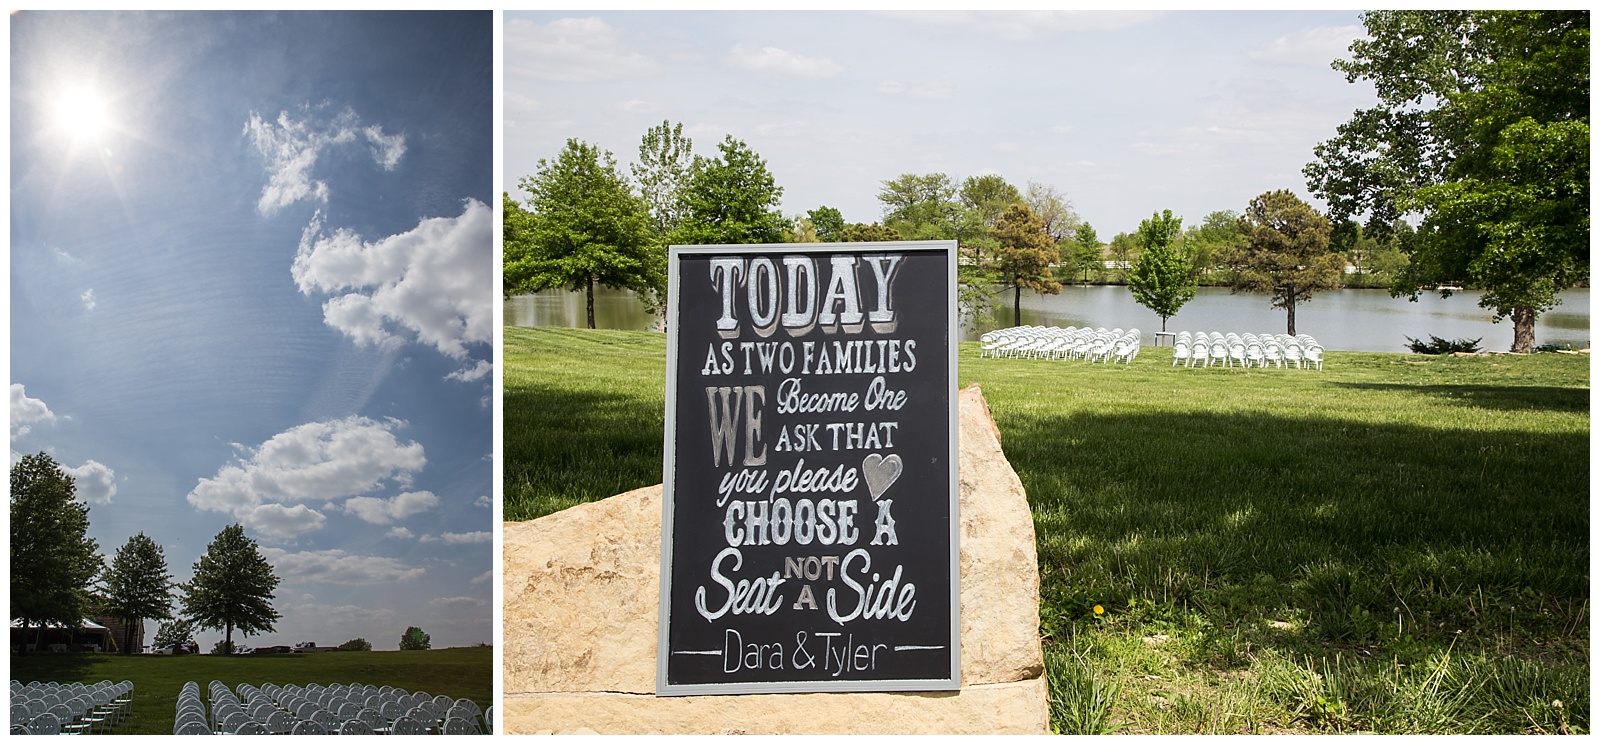 Wedding photography at Arcadian Moon Vineyards and Winery in Higginsville, Missouri.